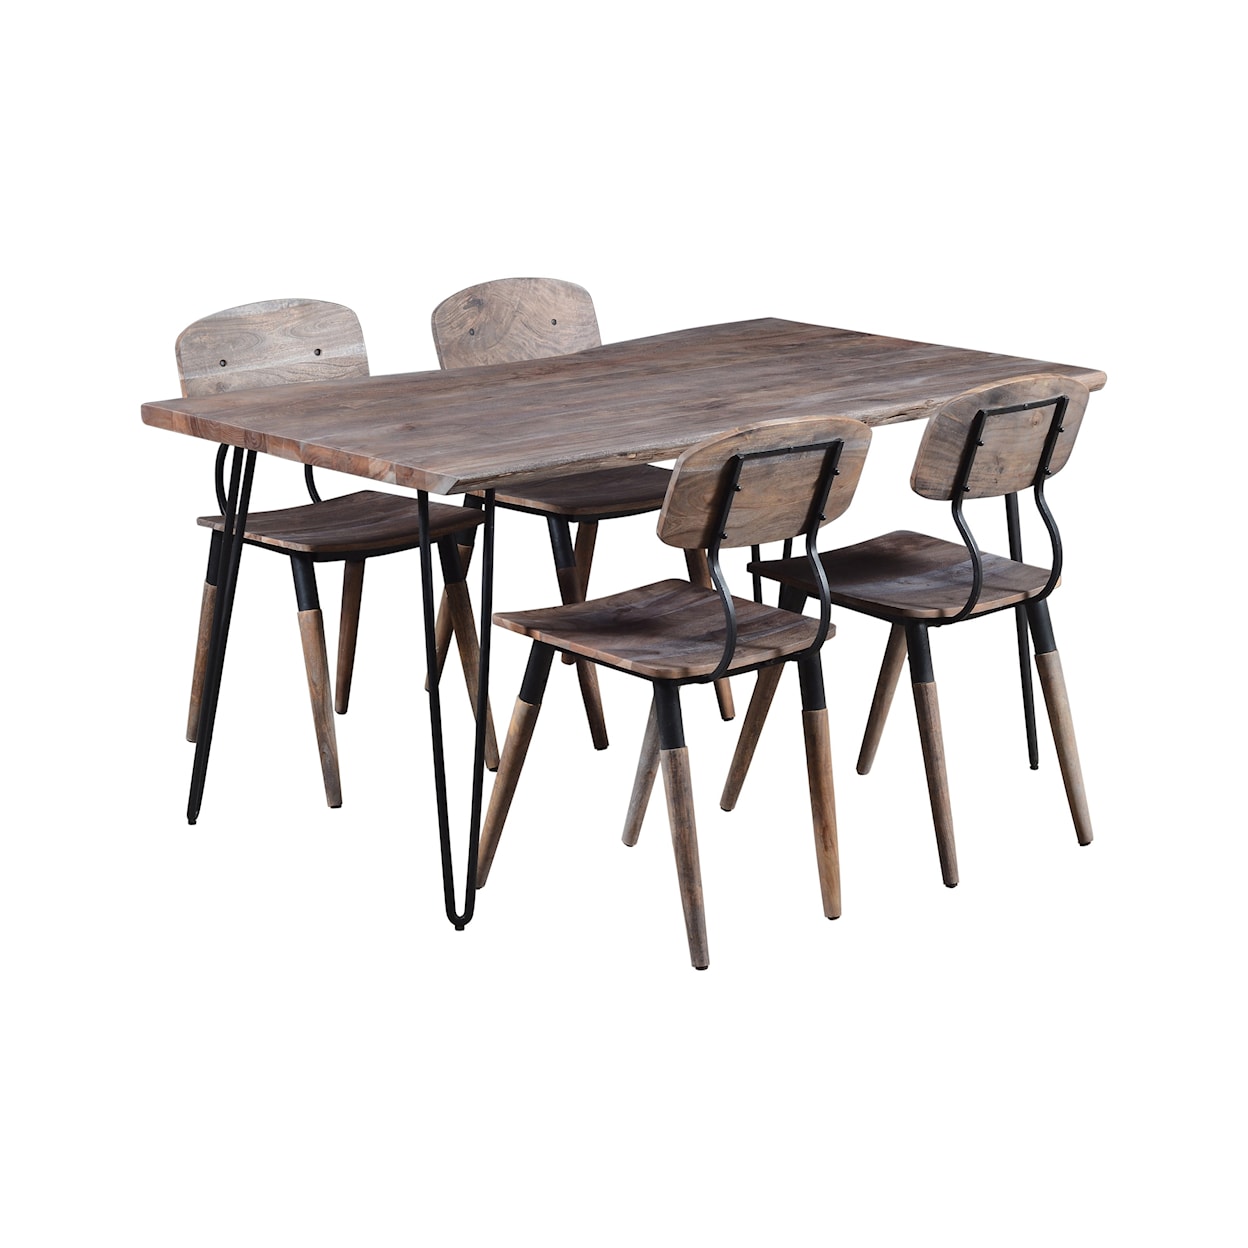 VFM Signature Nature's Edge 60" Dining Table with 4 Chairs